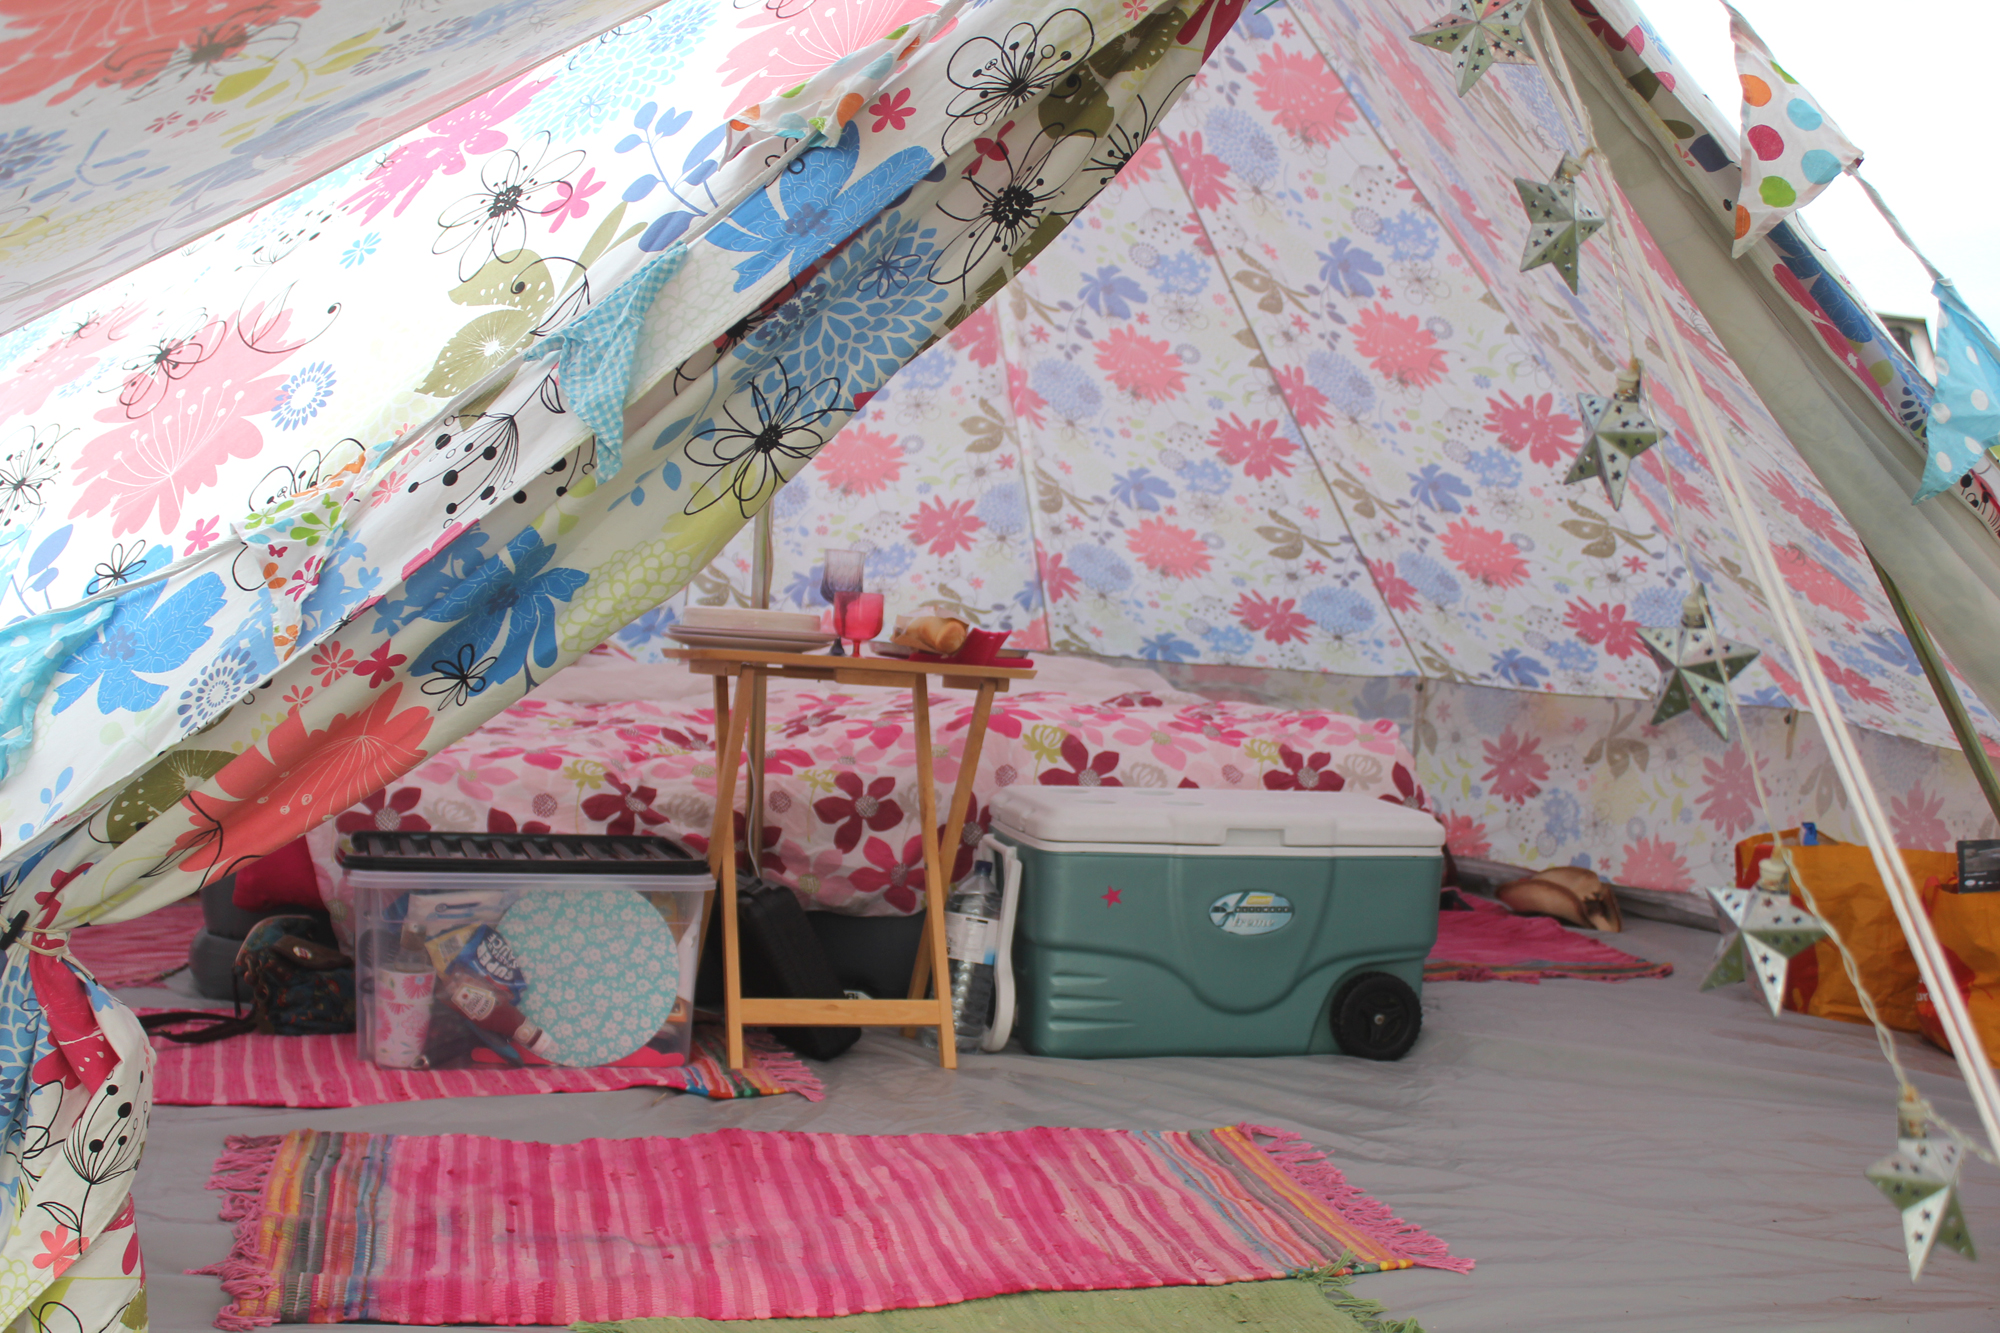 inside our bell tent